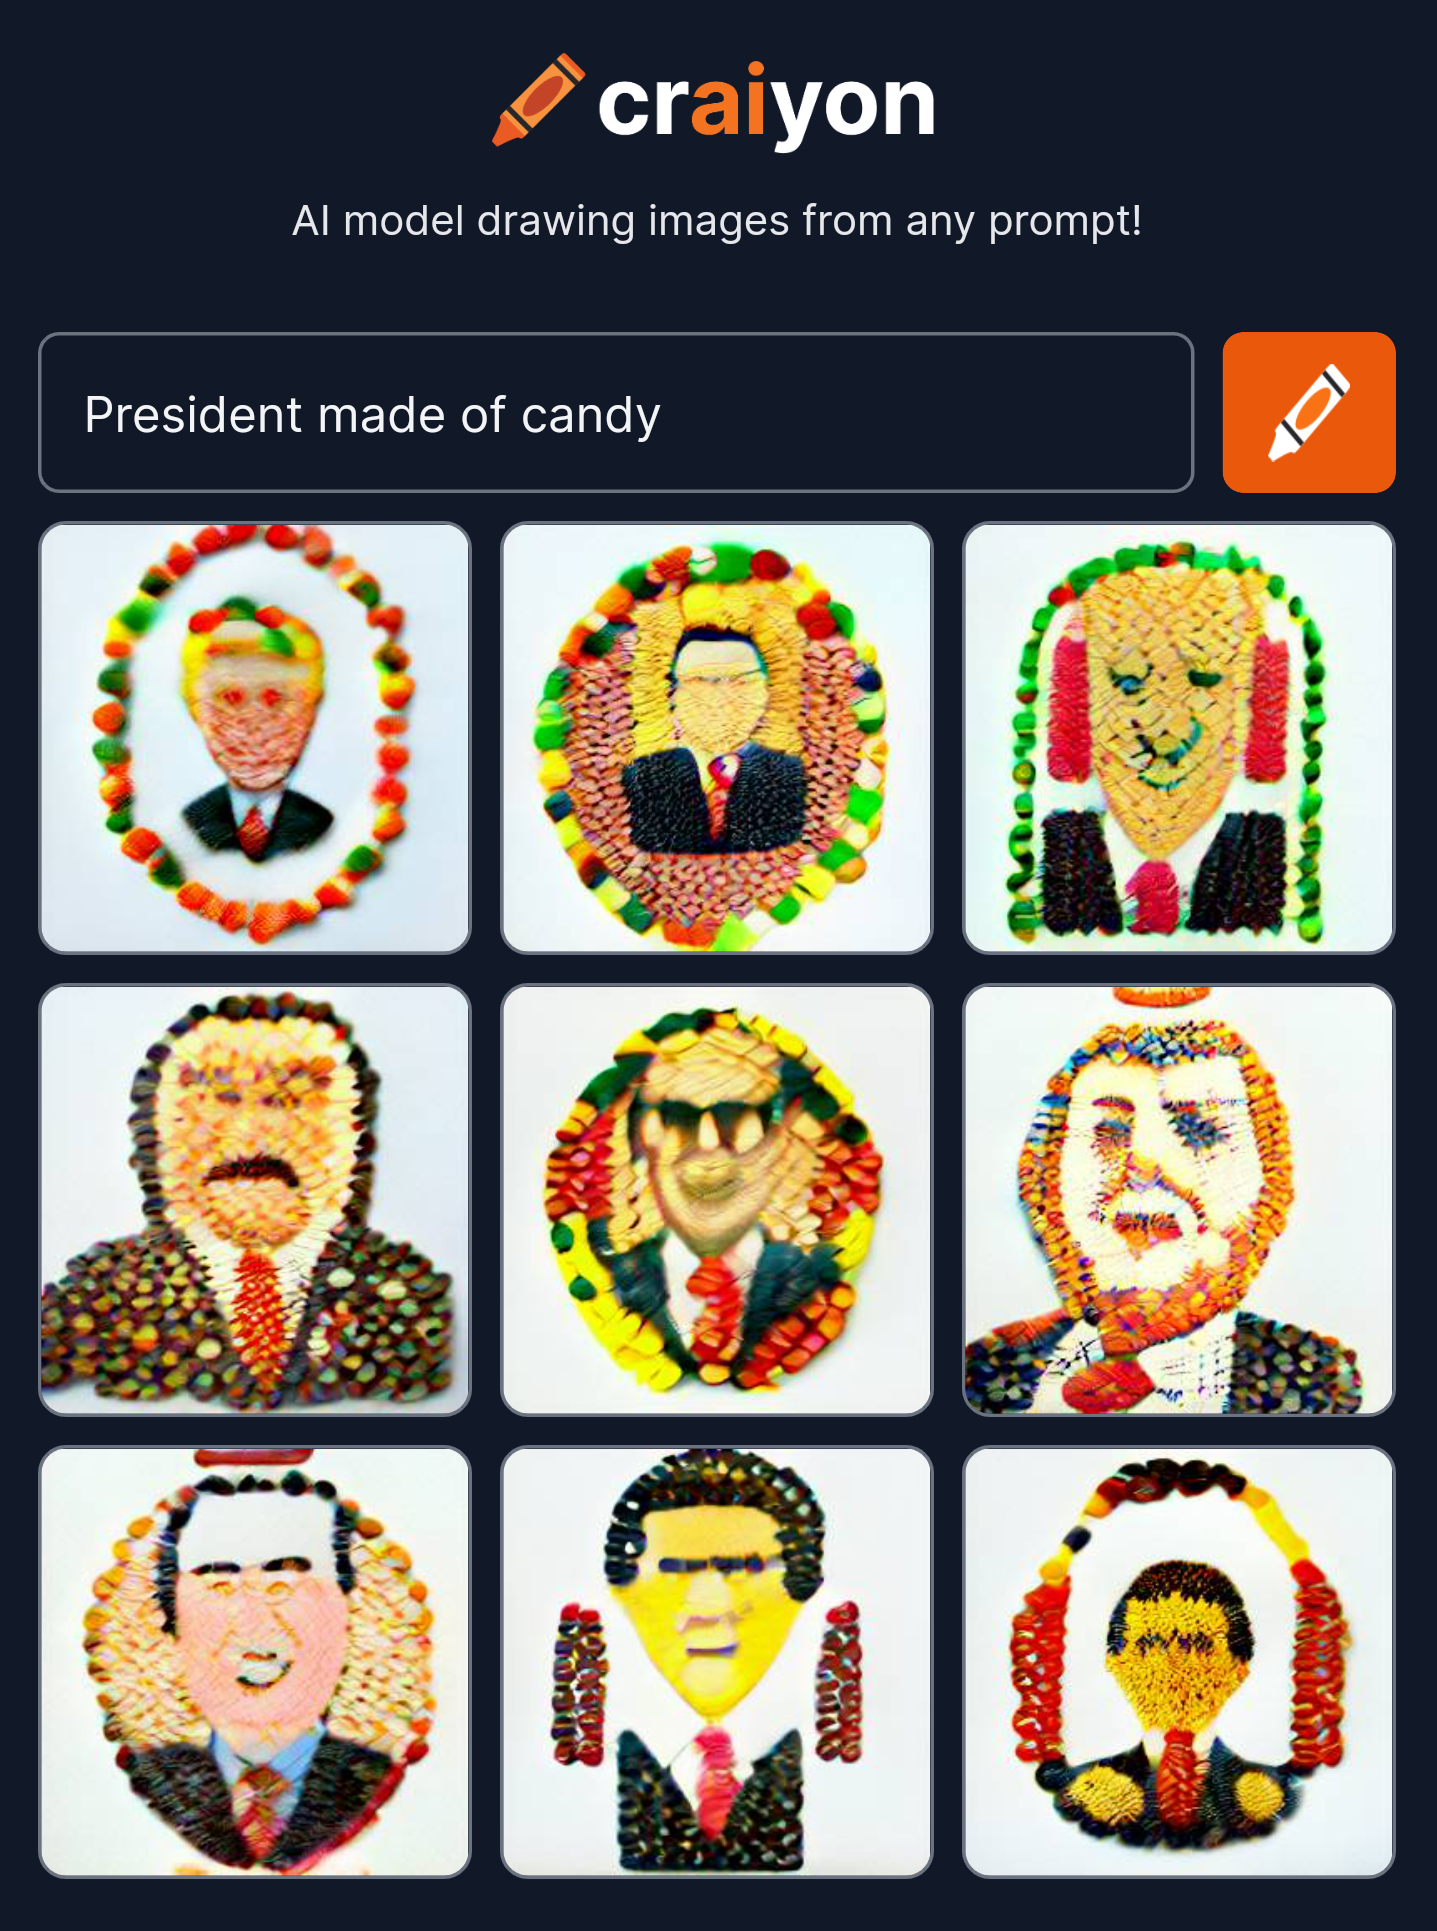 craiyon_005451_President_made_of_candy.jpg.png